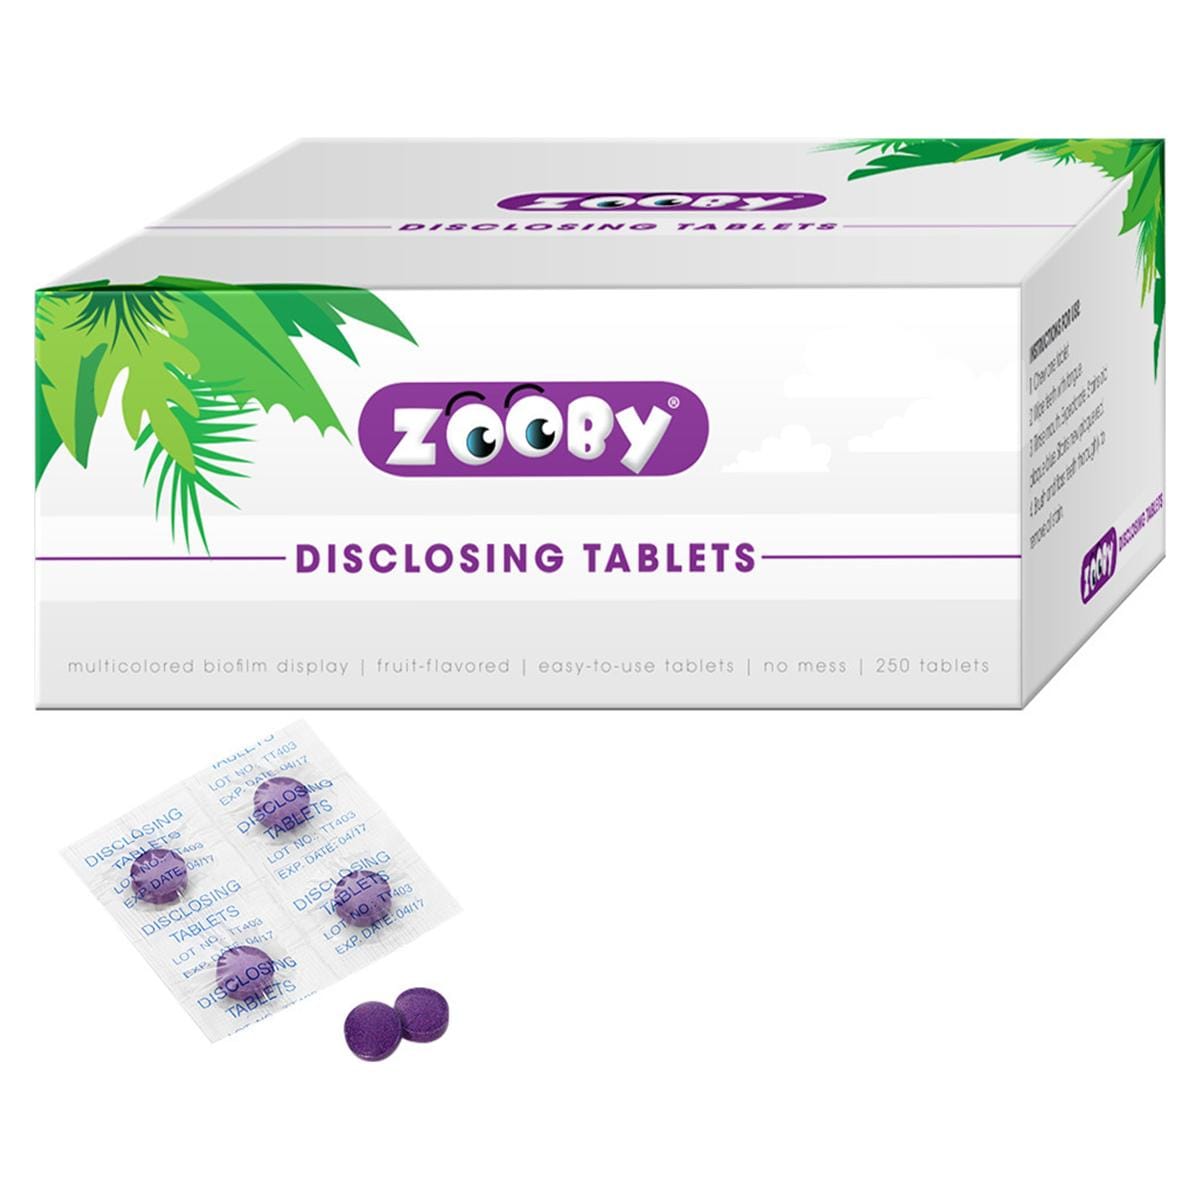 Zooby Disclosing Tablets - Bote 250 pcs